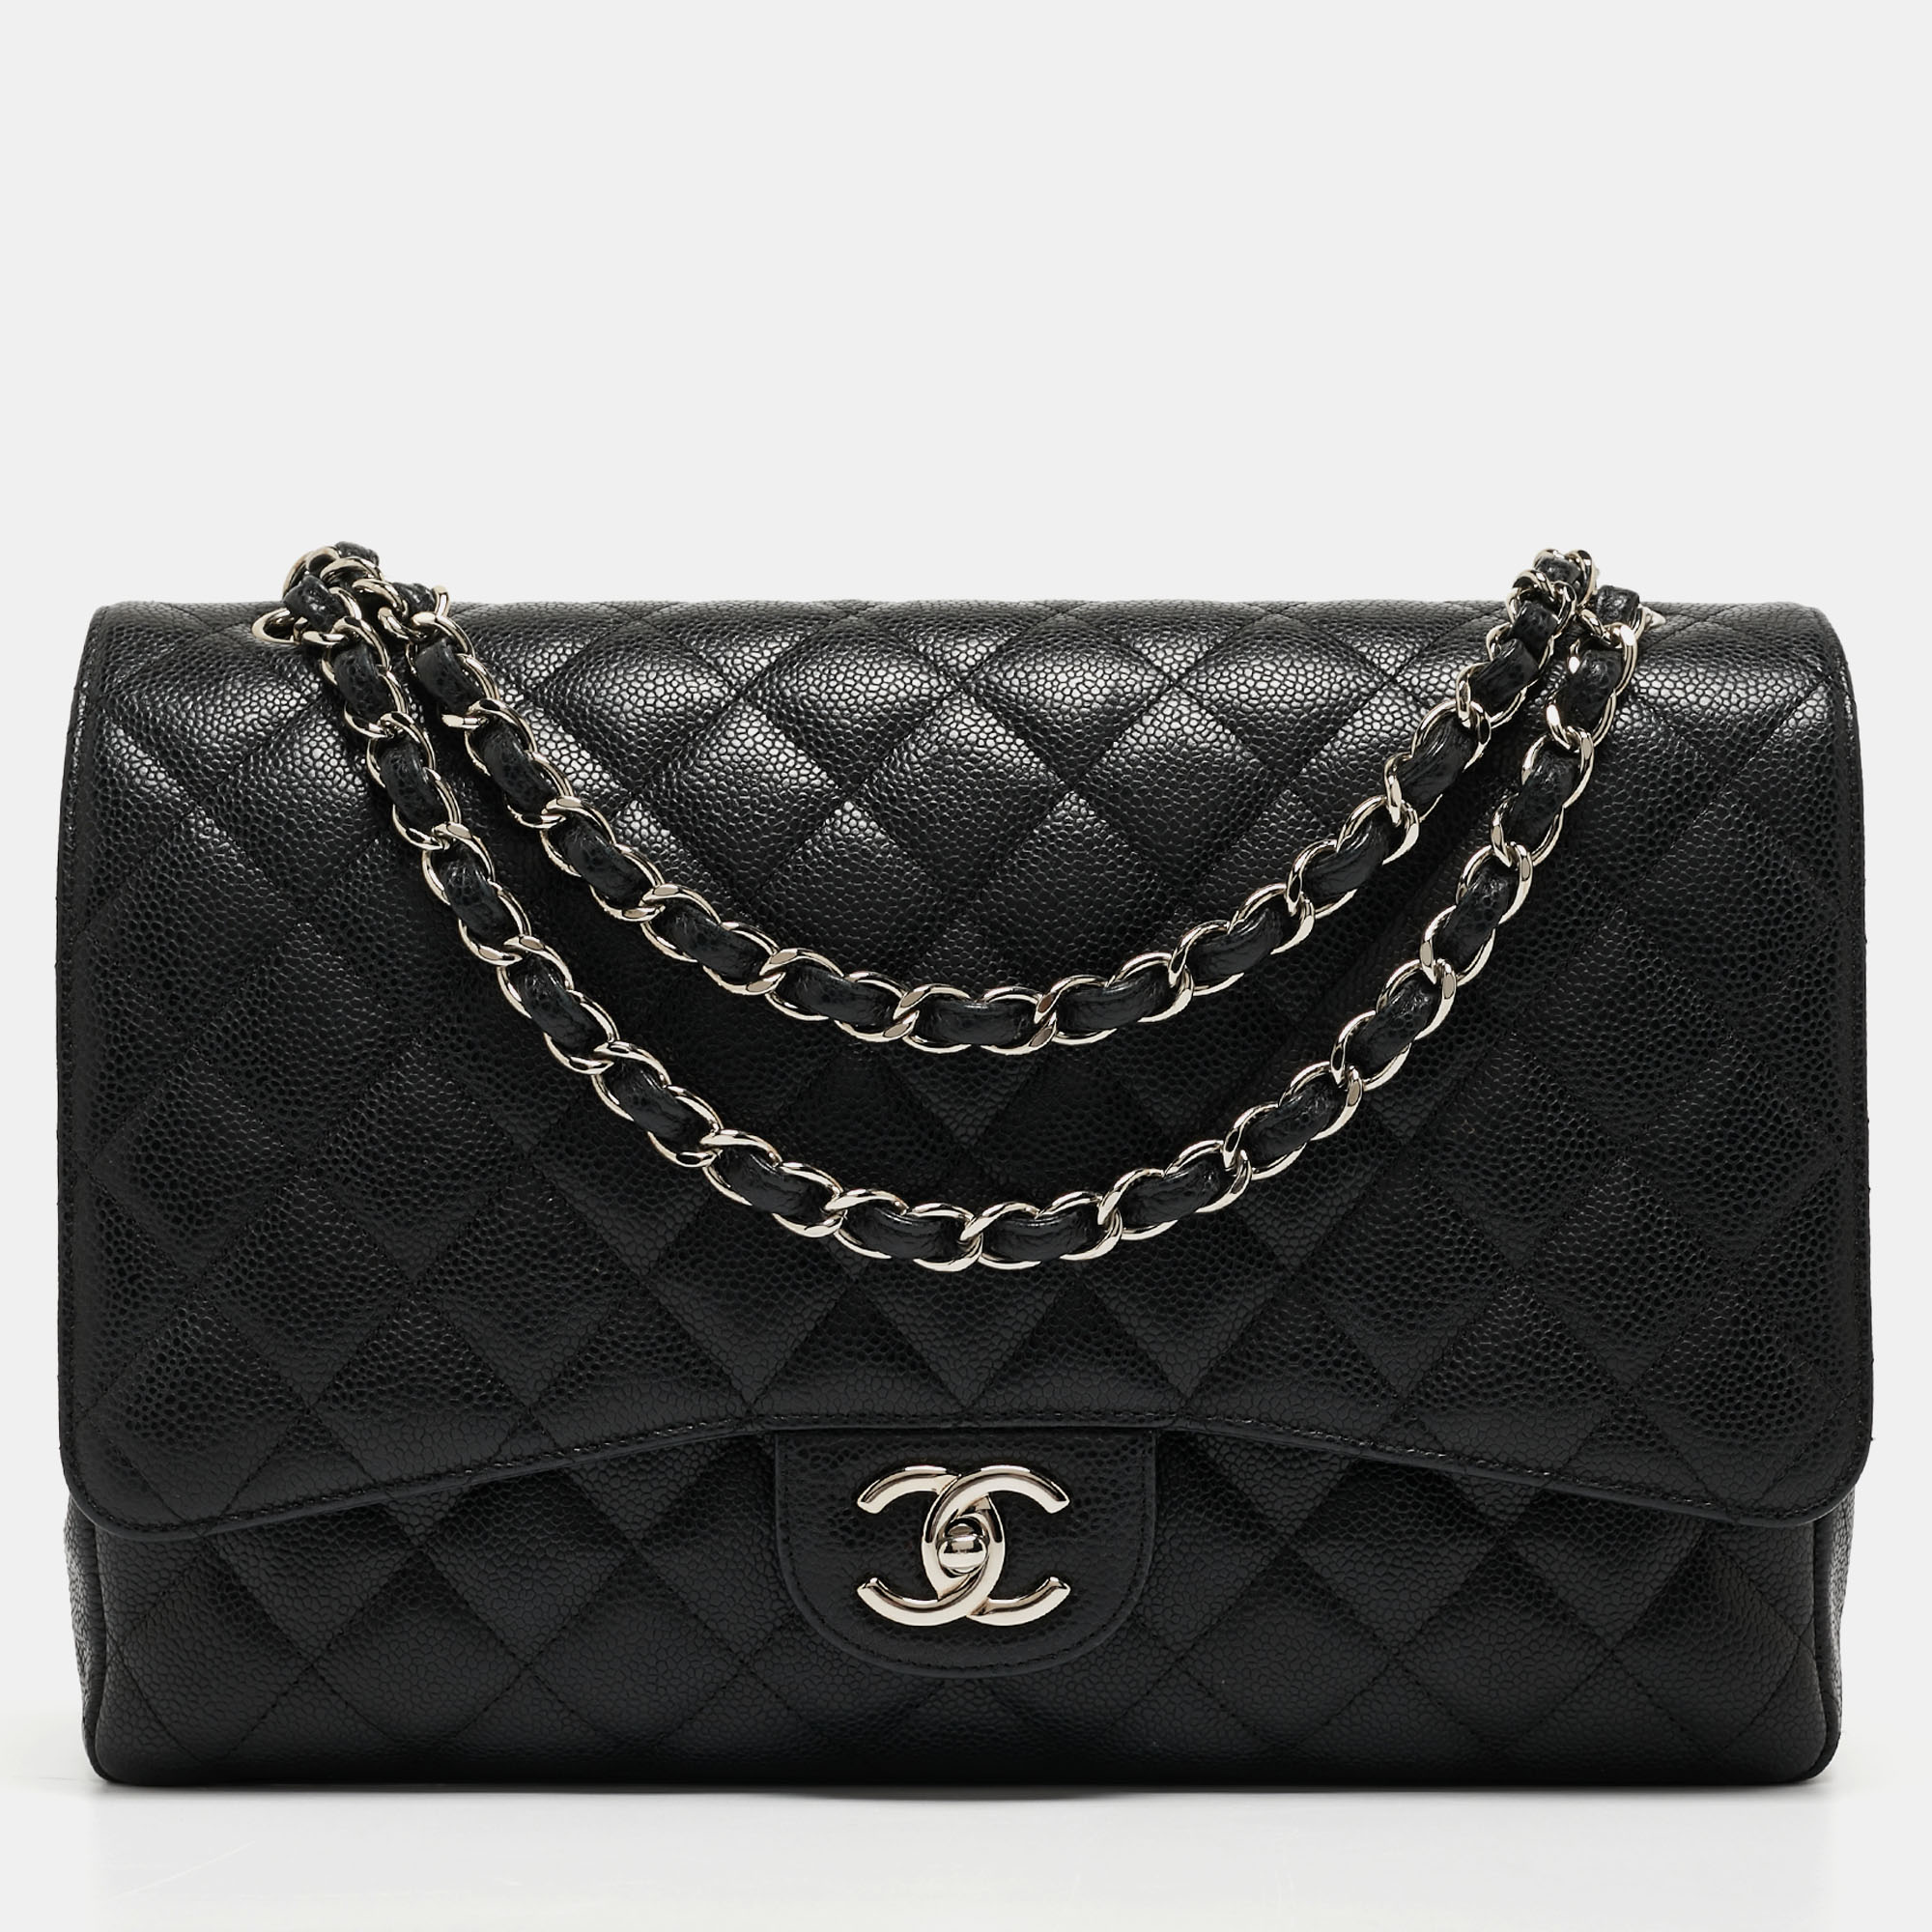 Chanel black quilted caviar leather maxi classic double flap bag